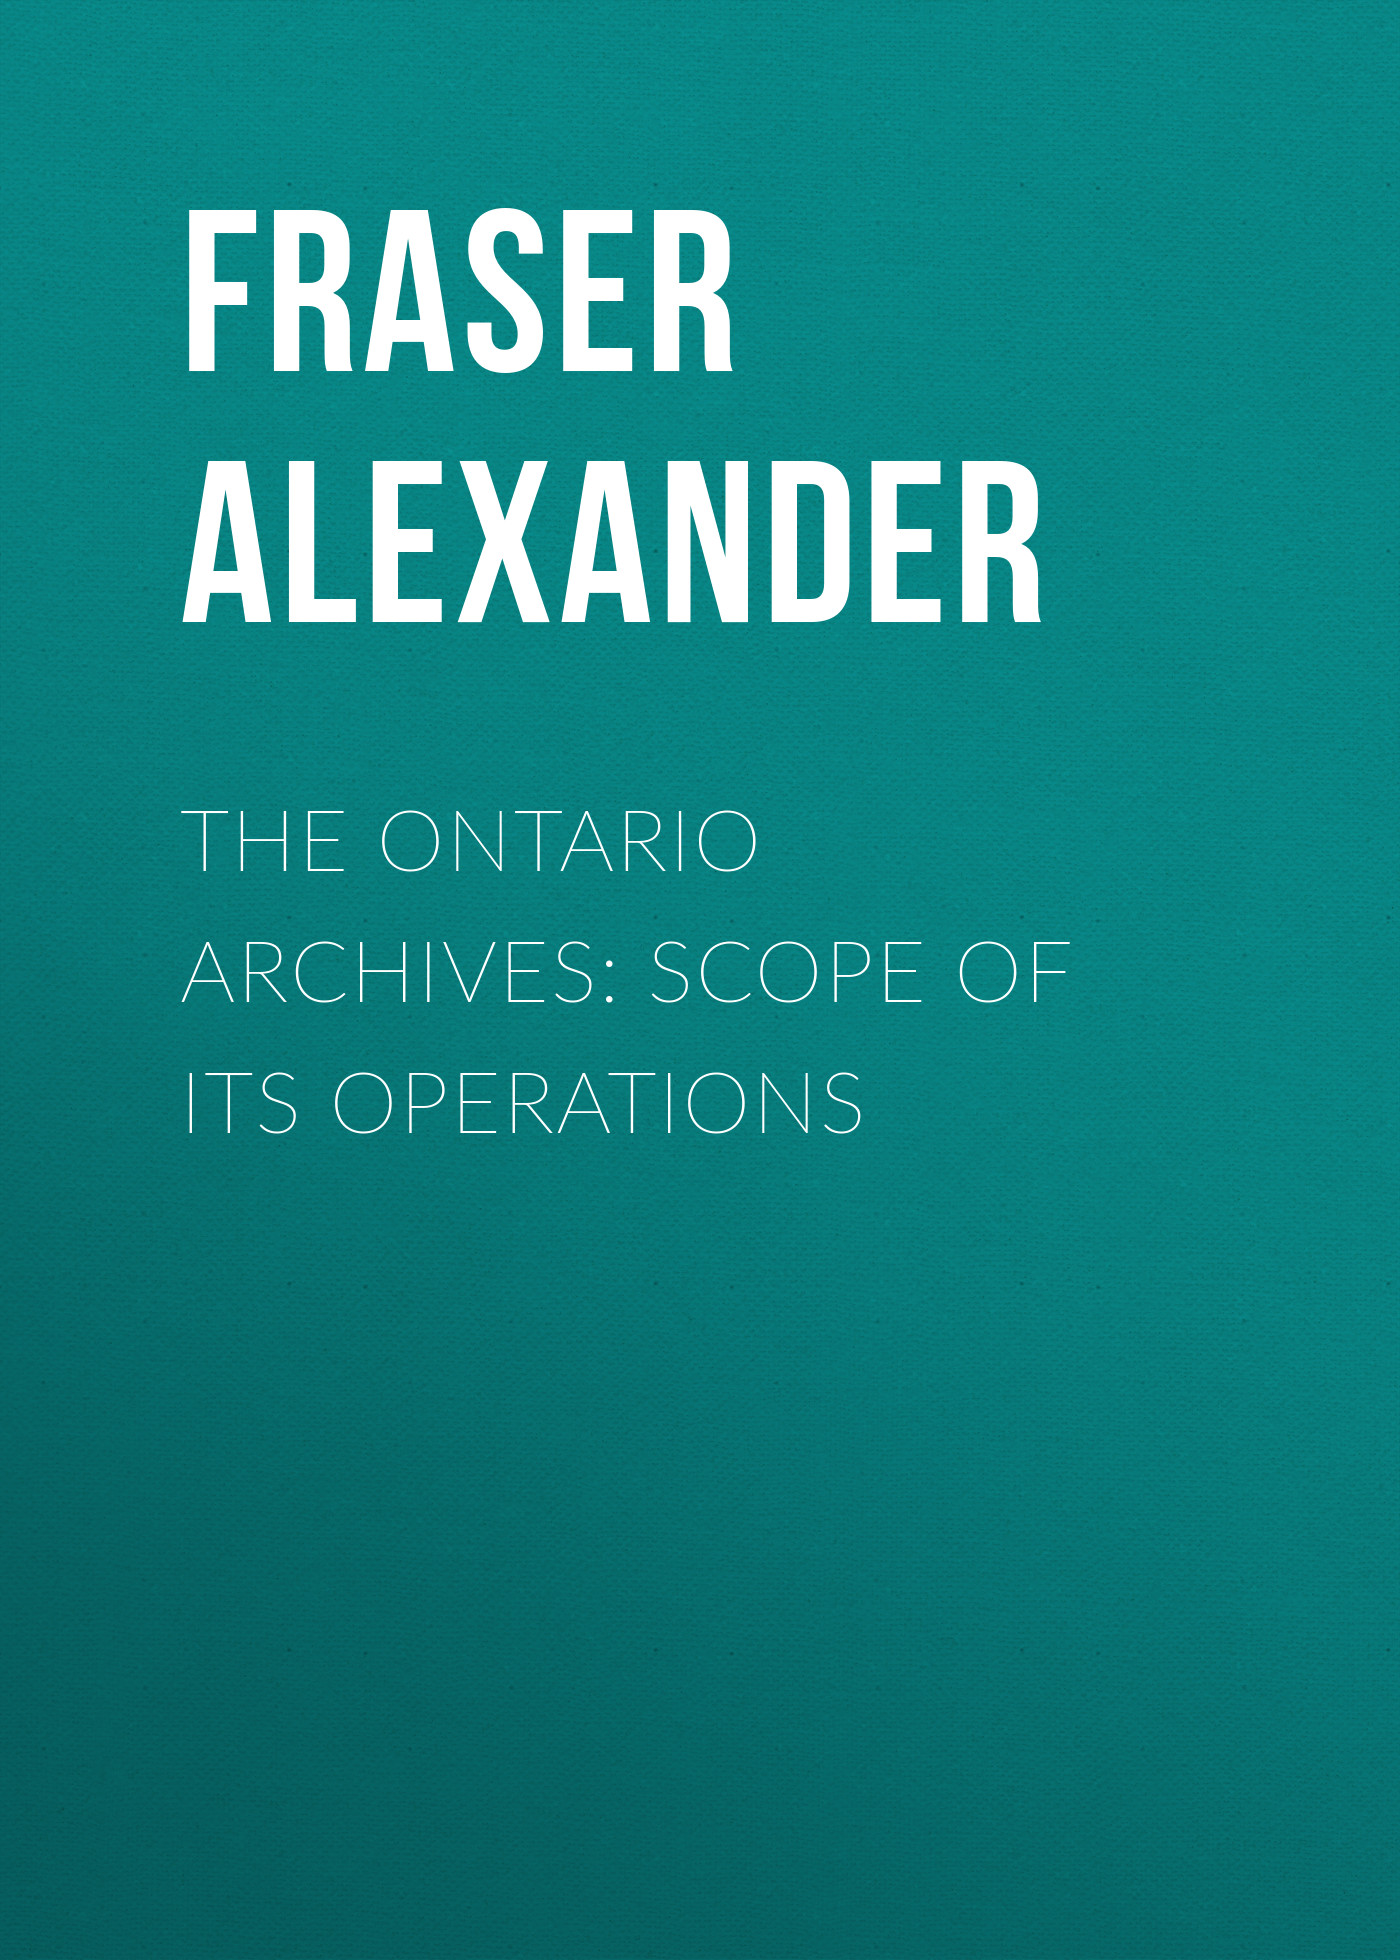 The Ontario Archives: Scope of its Operations